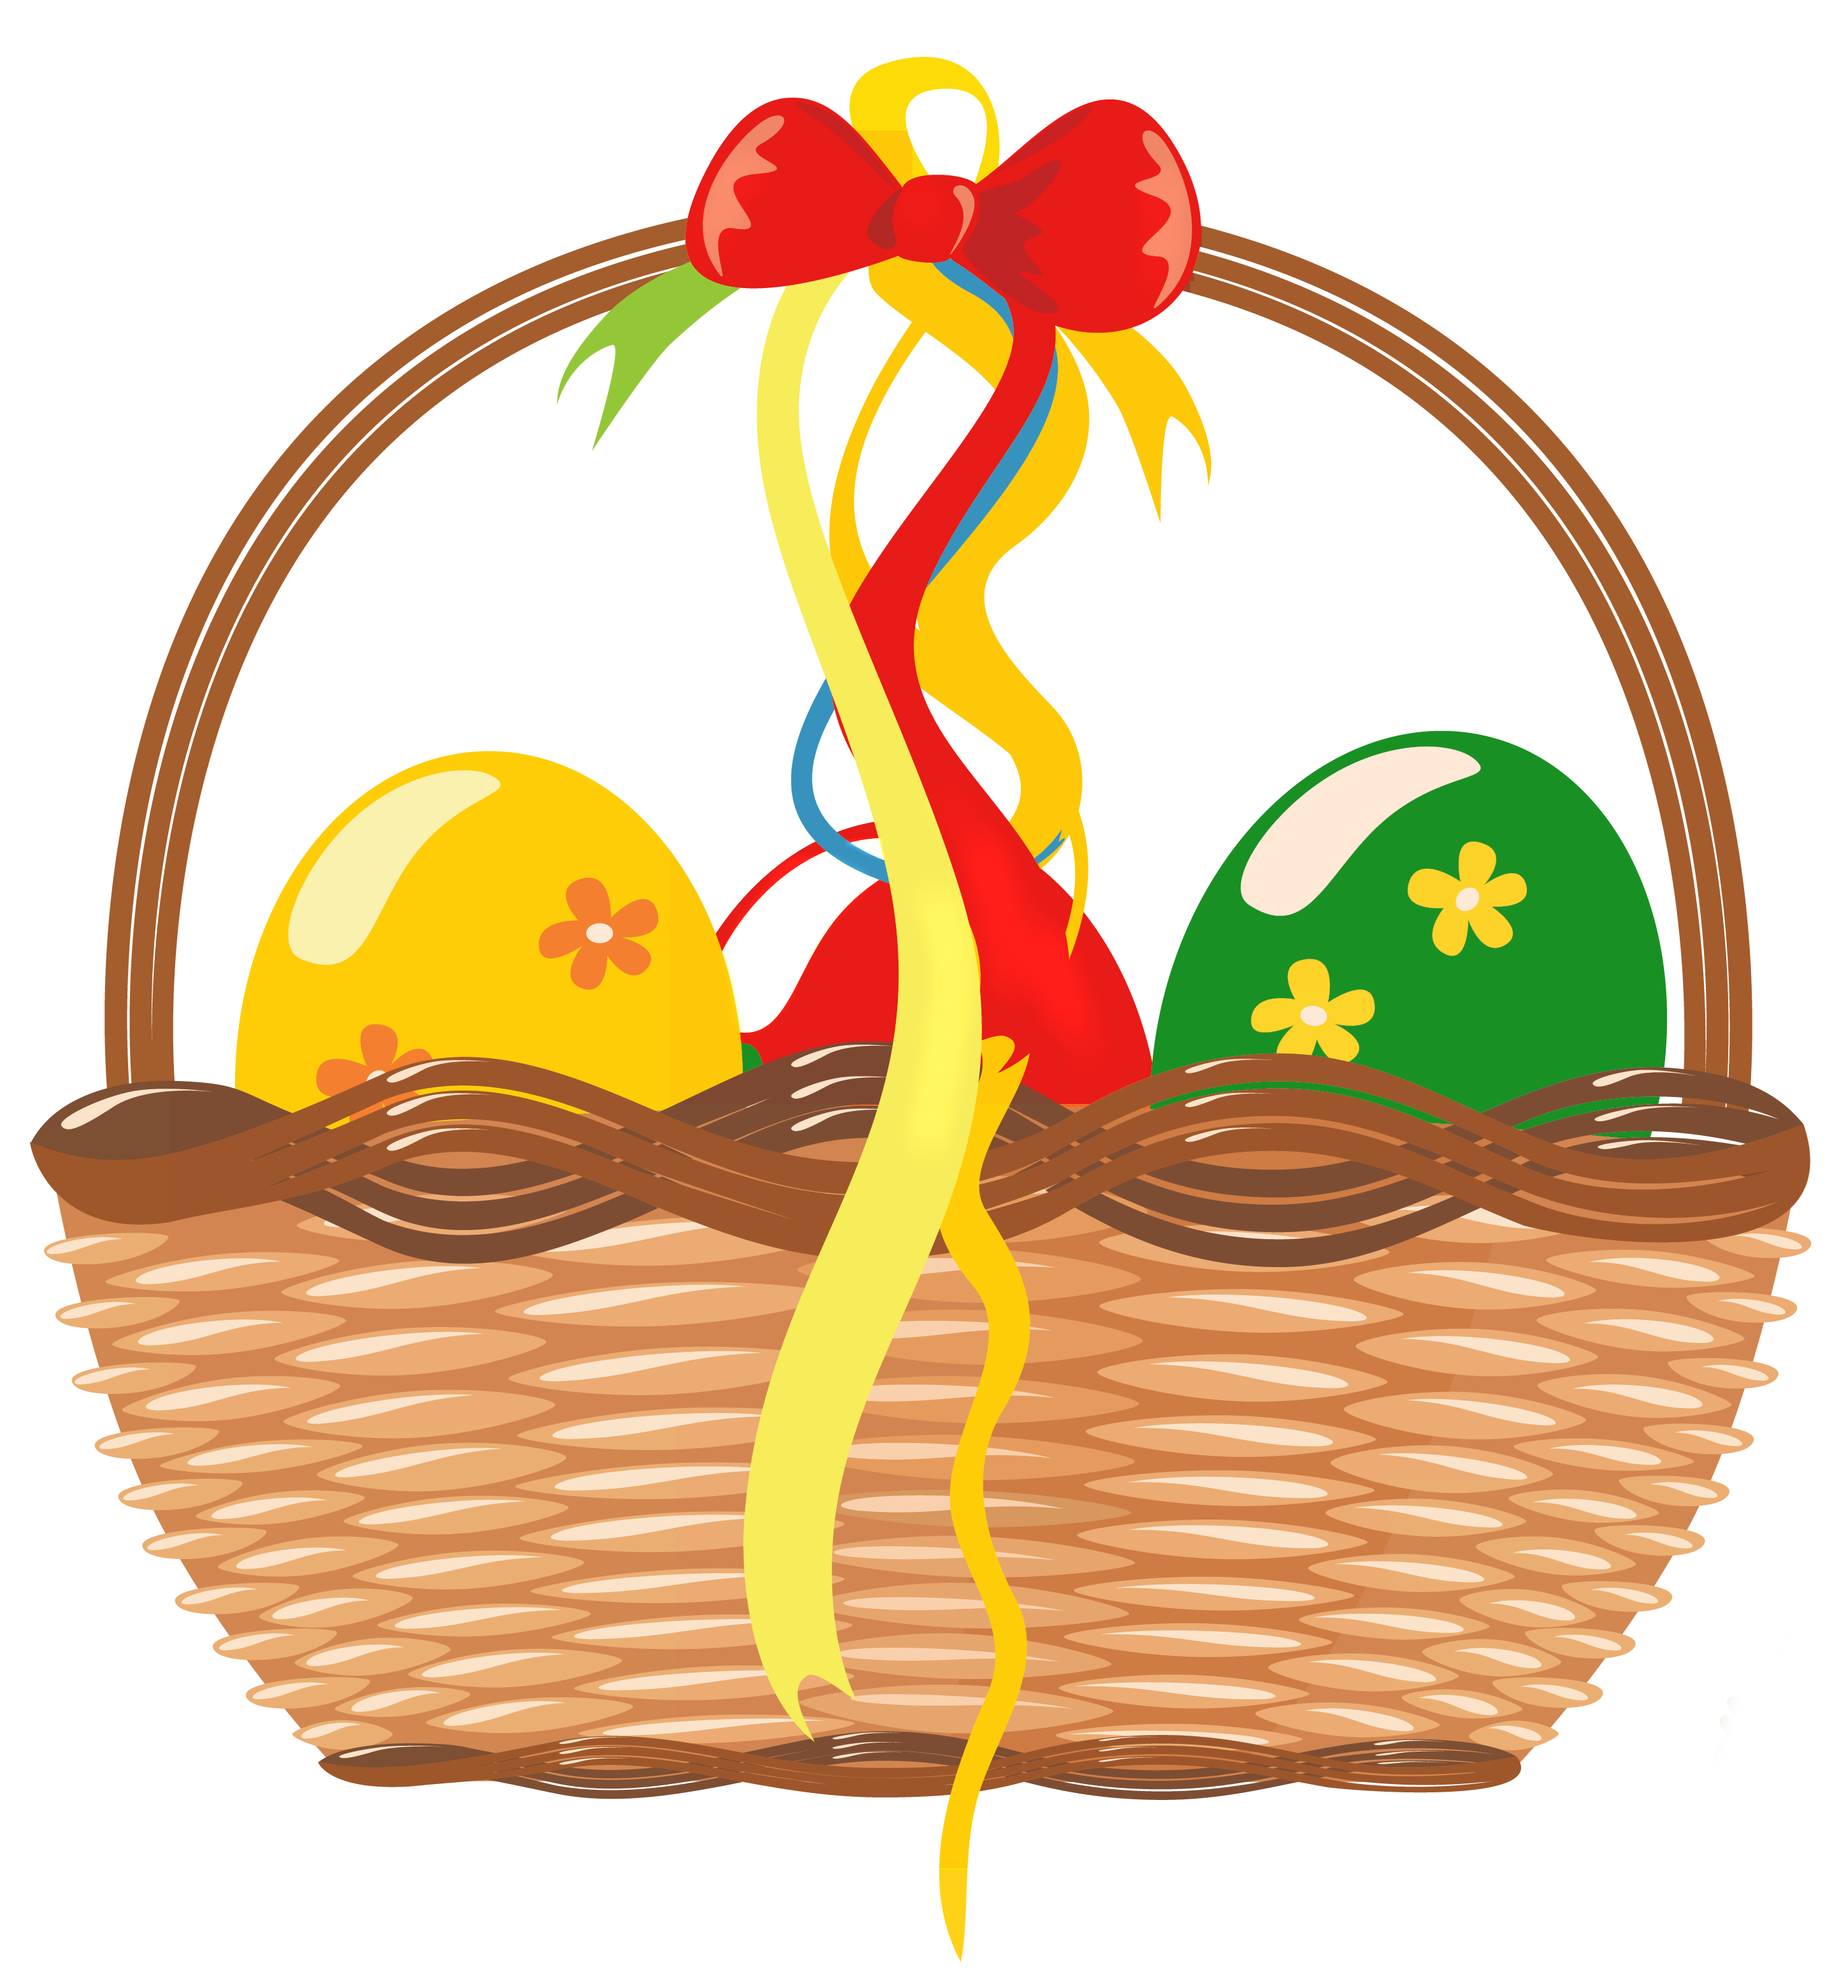 Empty easter basket clipart